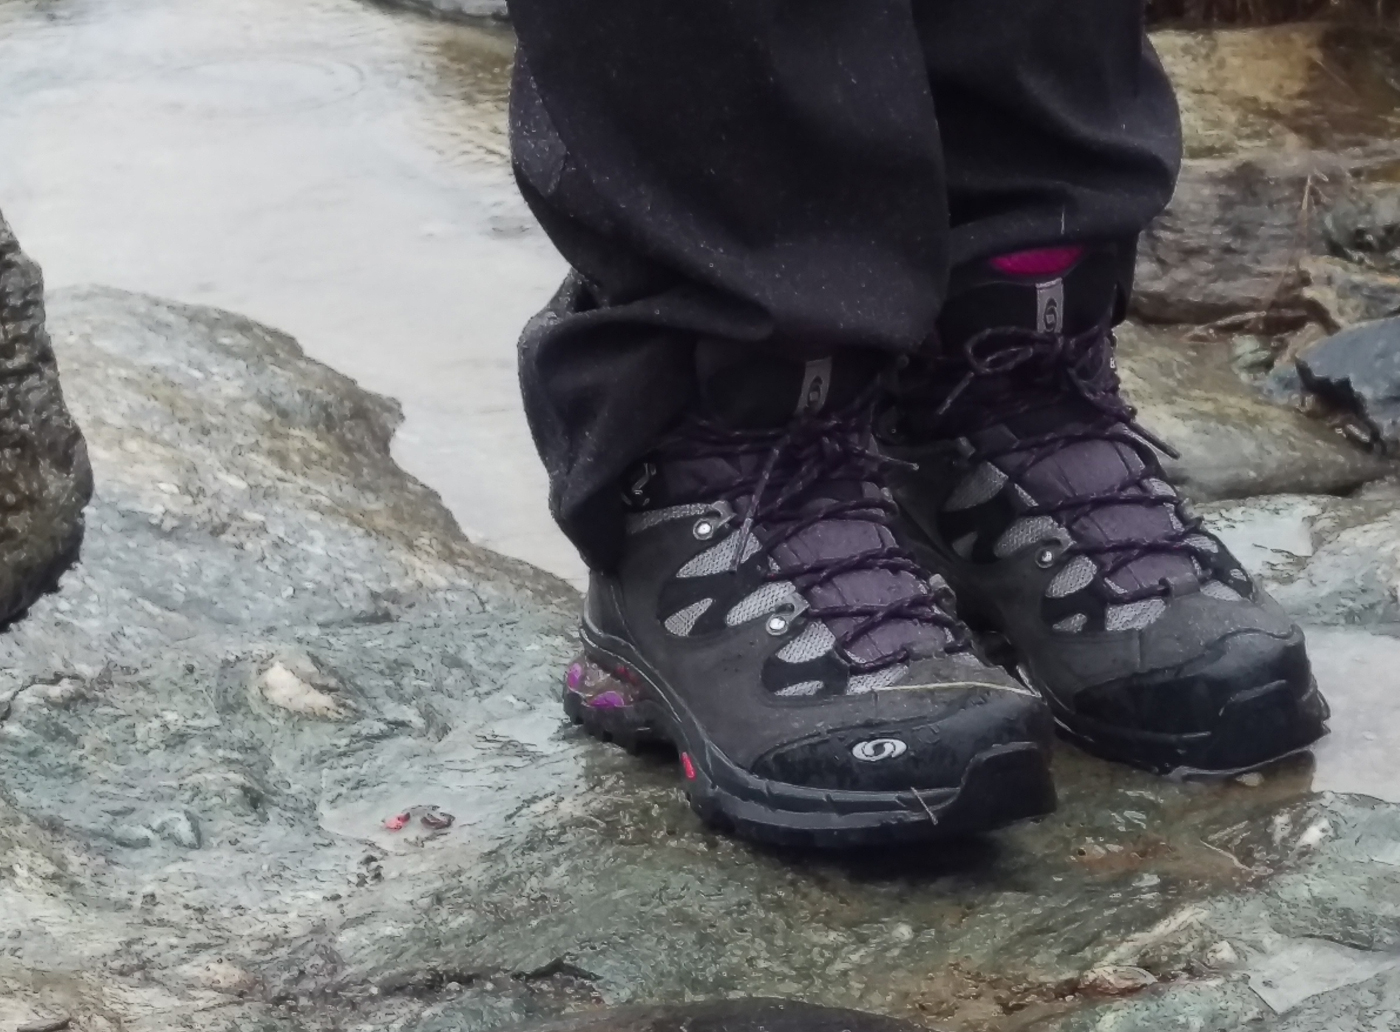 Craghoppers Kiwi Pro Stretch Hiking Trouser Review Walkers Love Them!